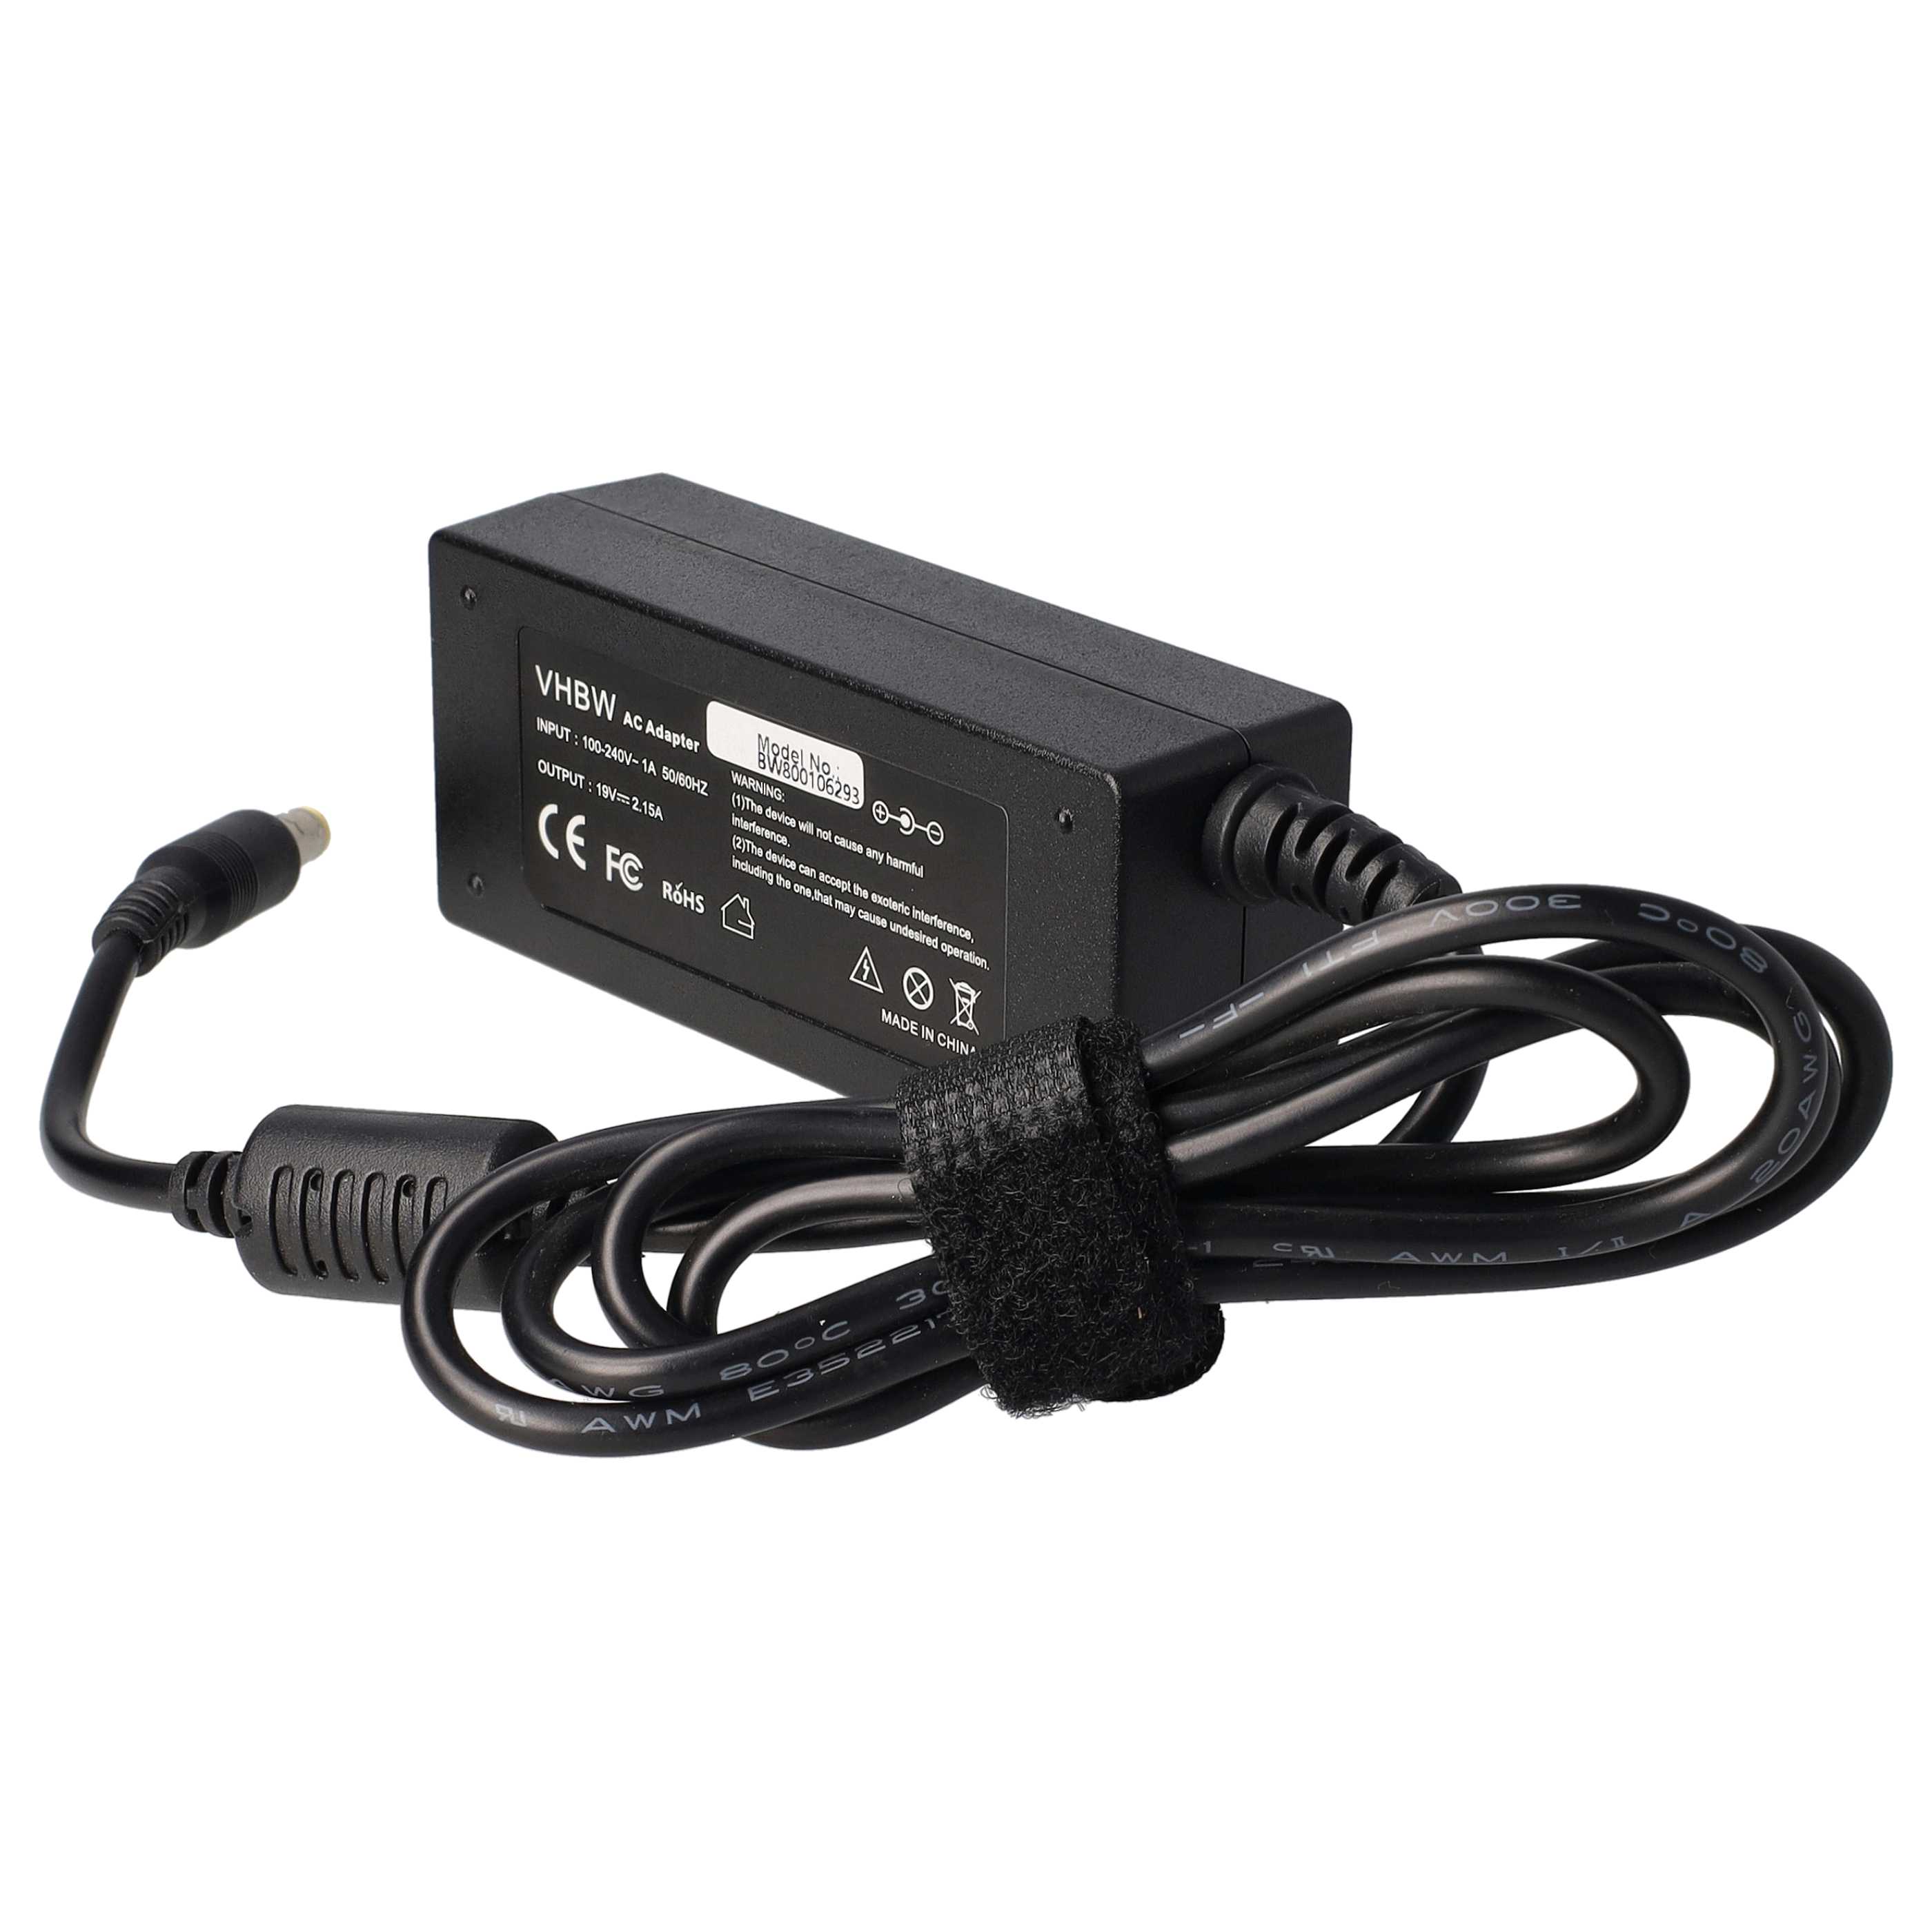 Mains Power Adapter replaces Acer A045R016L, A13-045N2A, ADP-45HE BB, ADP-40TH A for AcerNotebook, 40 W